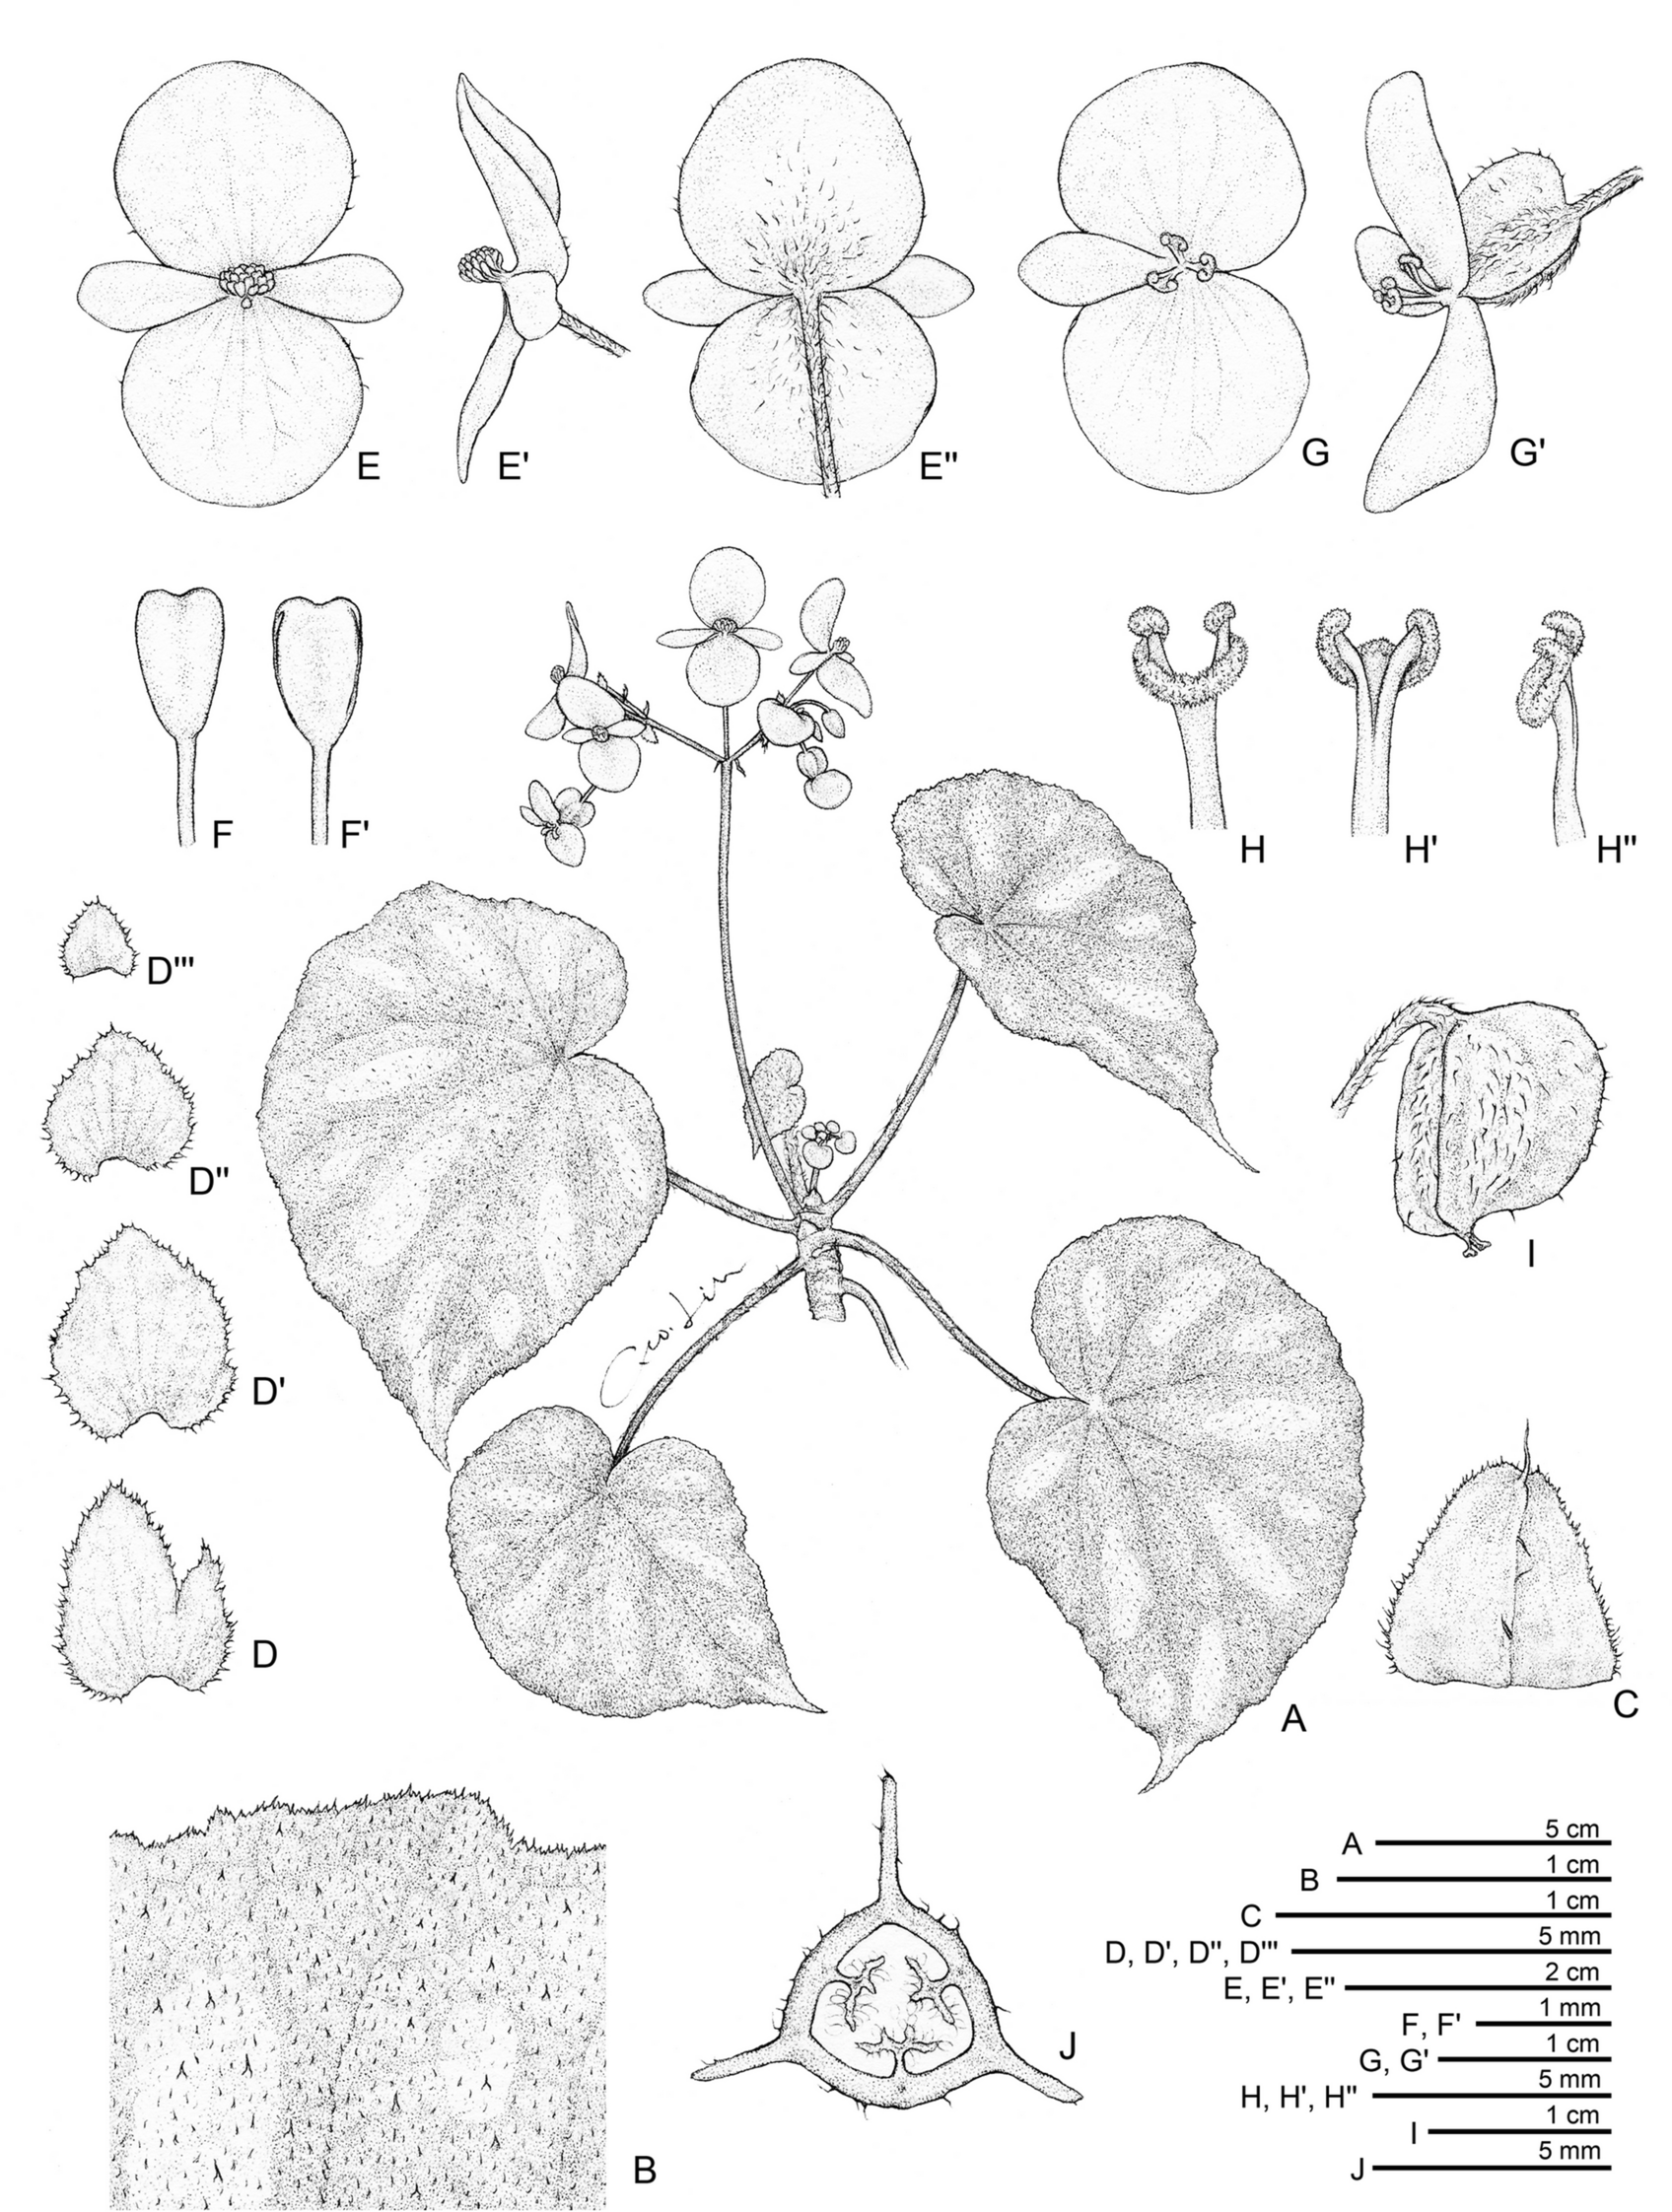 Fig. 12